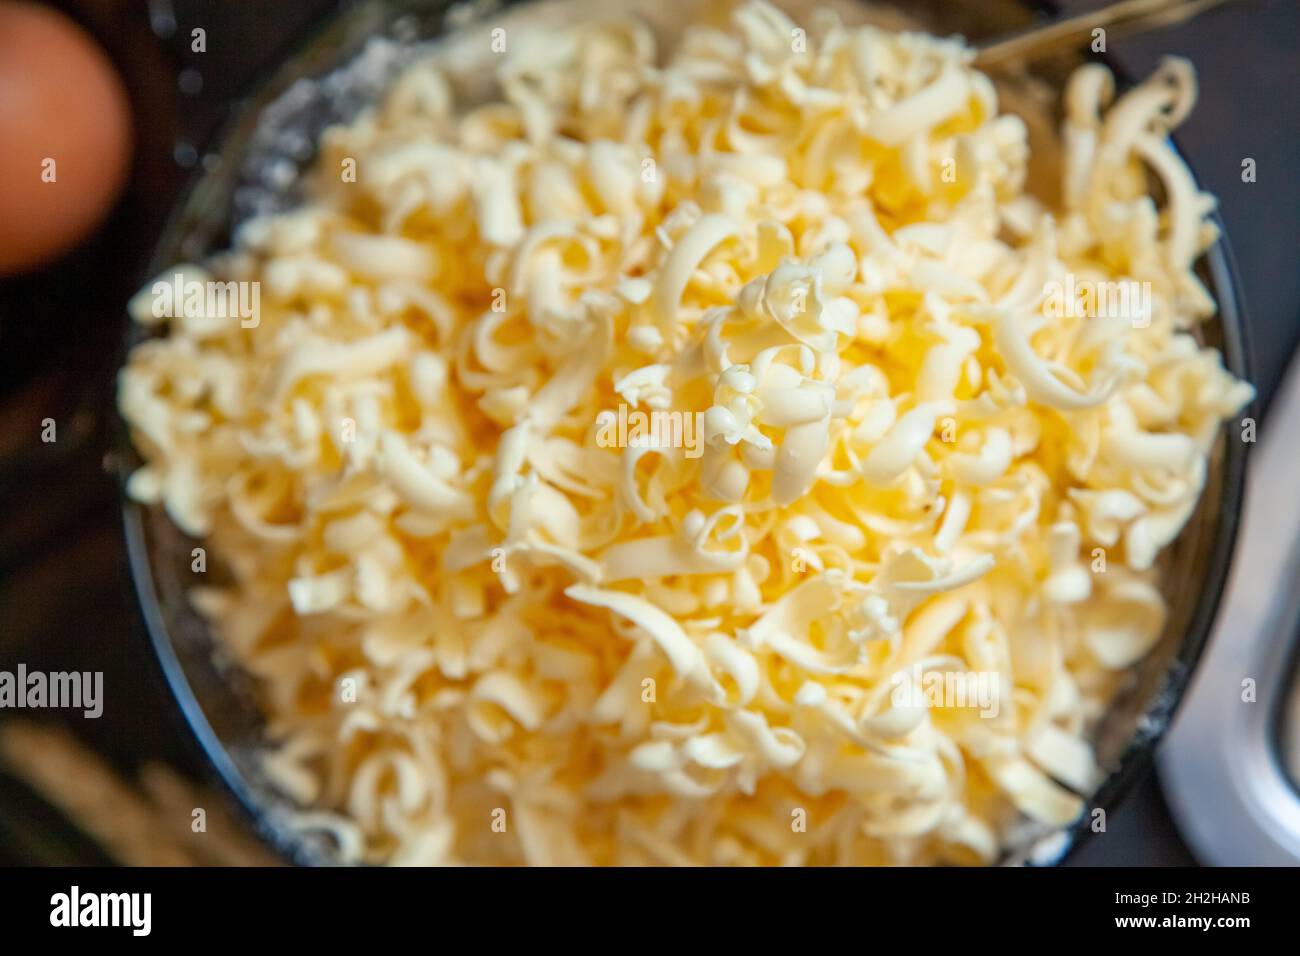 Grated butter for baking on table. Baking ingredients for shortbread pastry: grated butter, flour, eggs, sour cream on a wooden background flat lay. Stock Photo